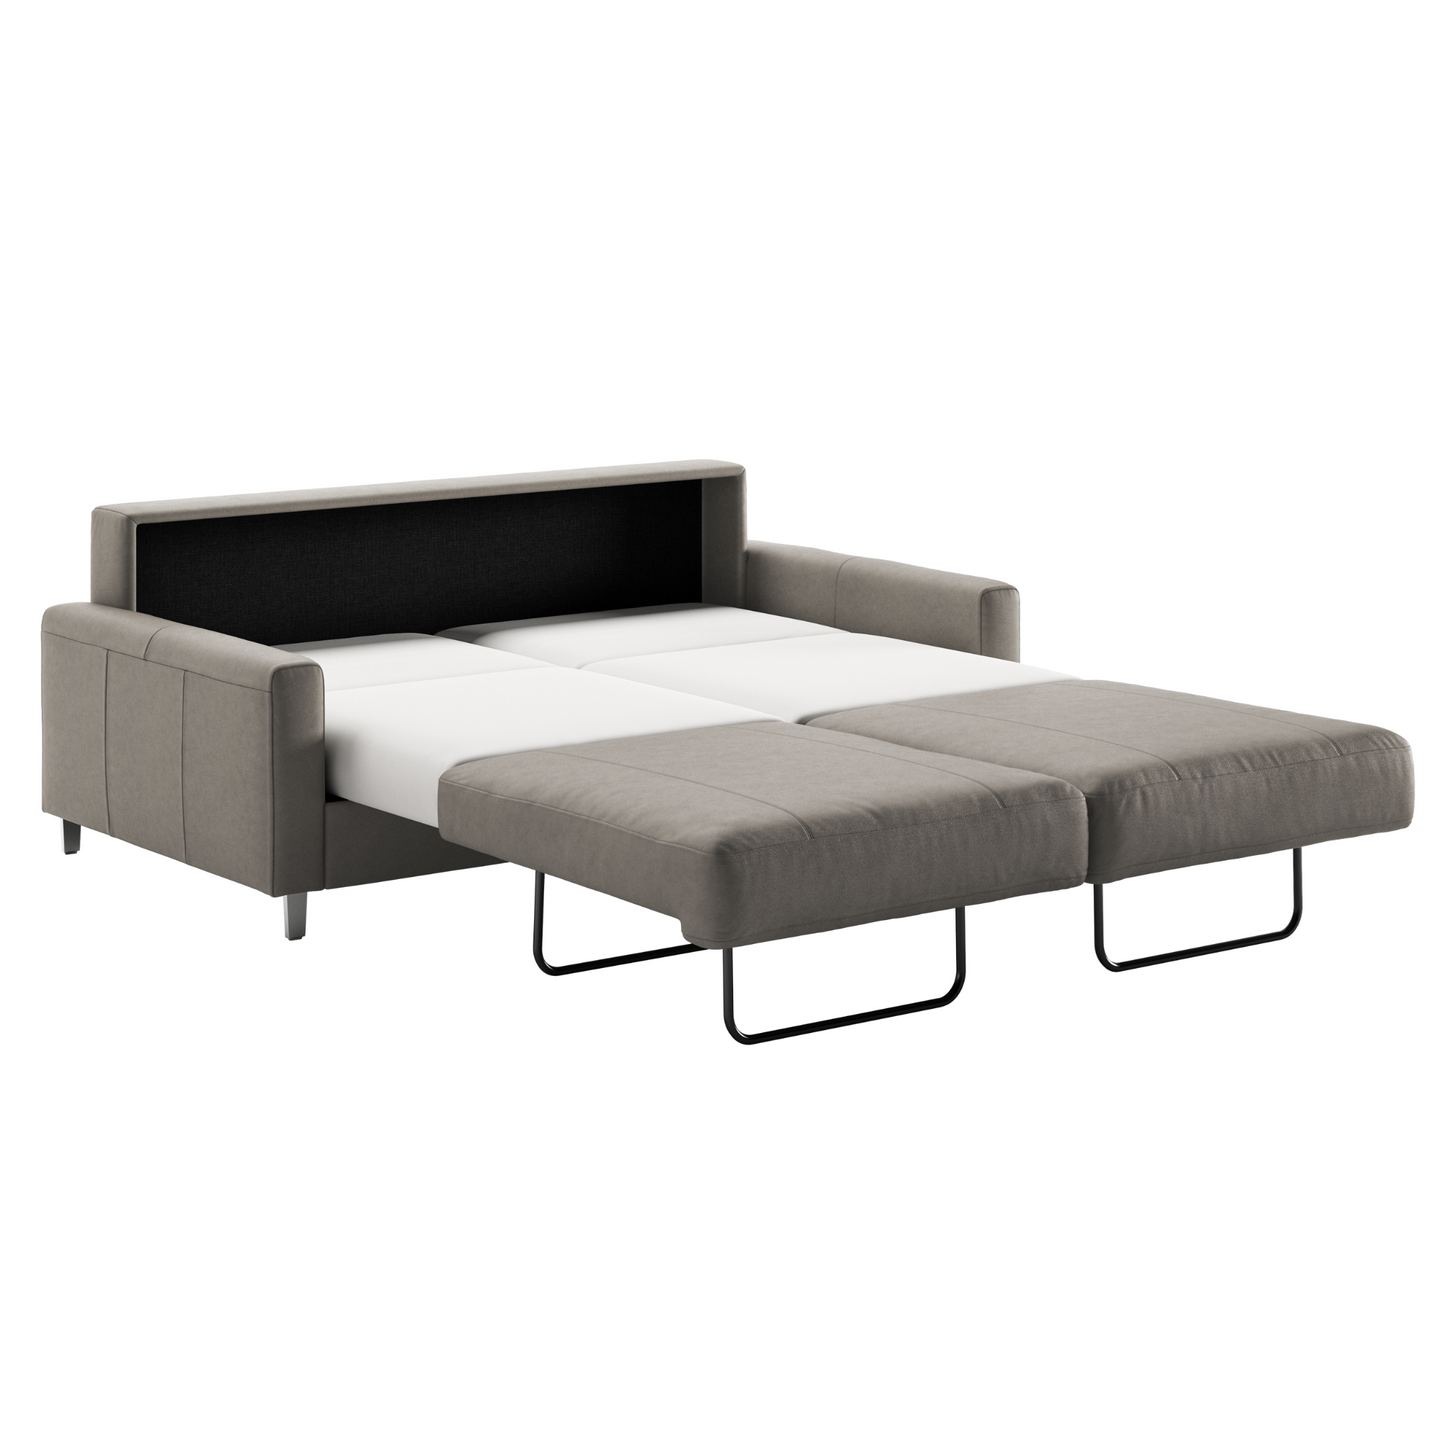 Luonto Nico Queen Sleeper Sofa Quick Ship Program Soft Antique Leather 4340 (Grey) with Chrome Leg and Open Sleeper Bed